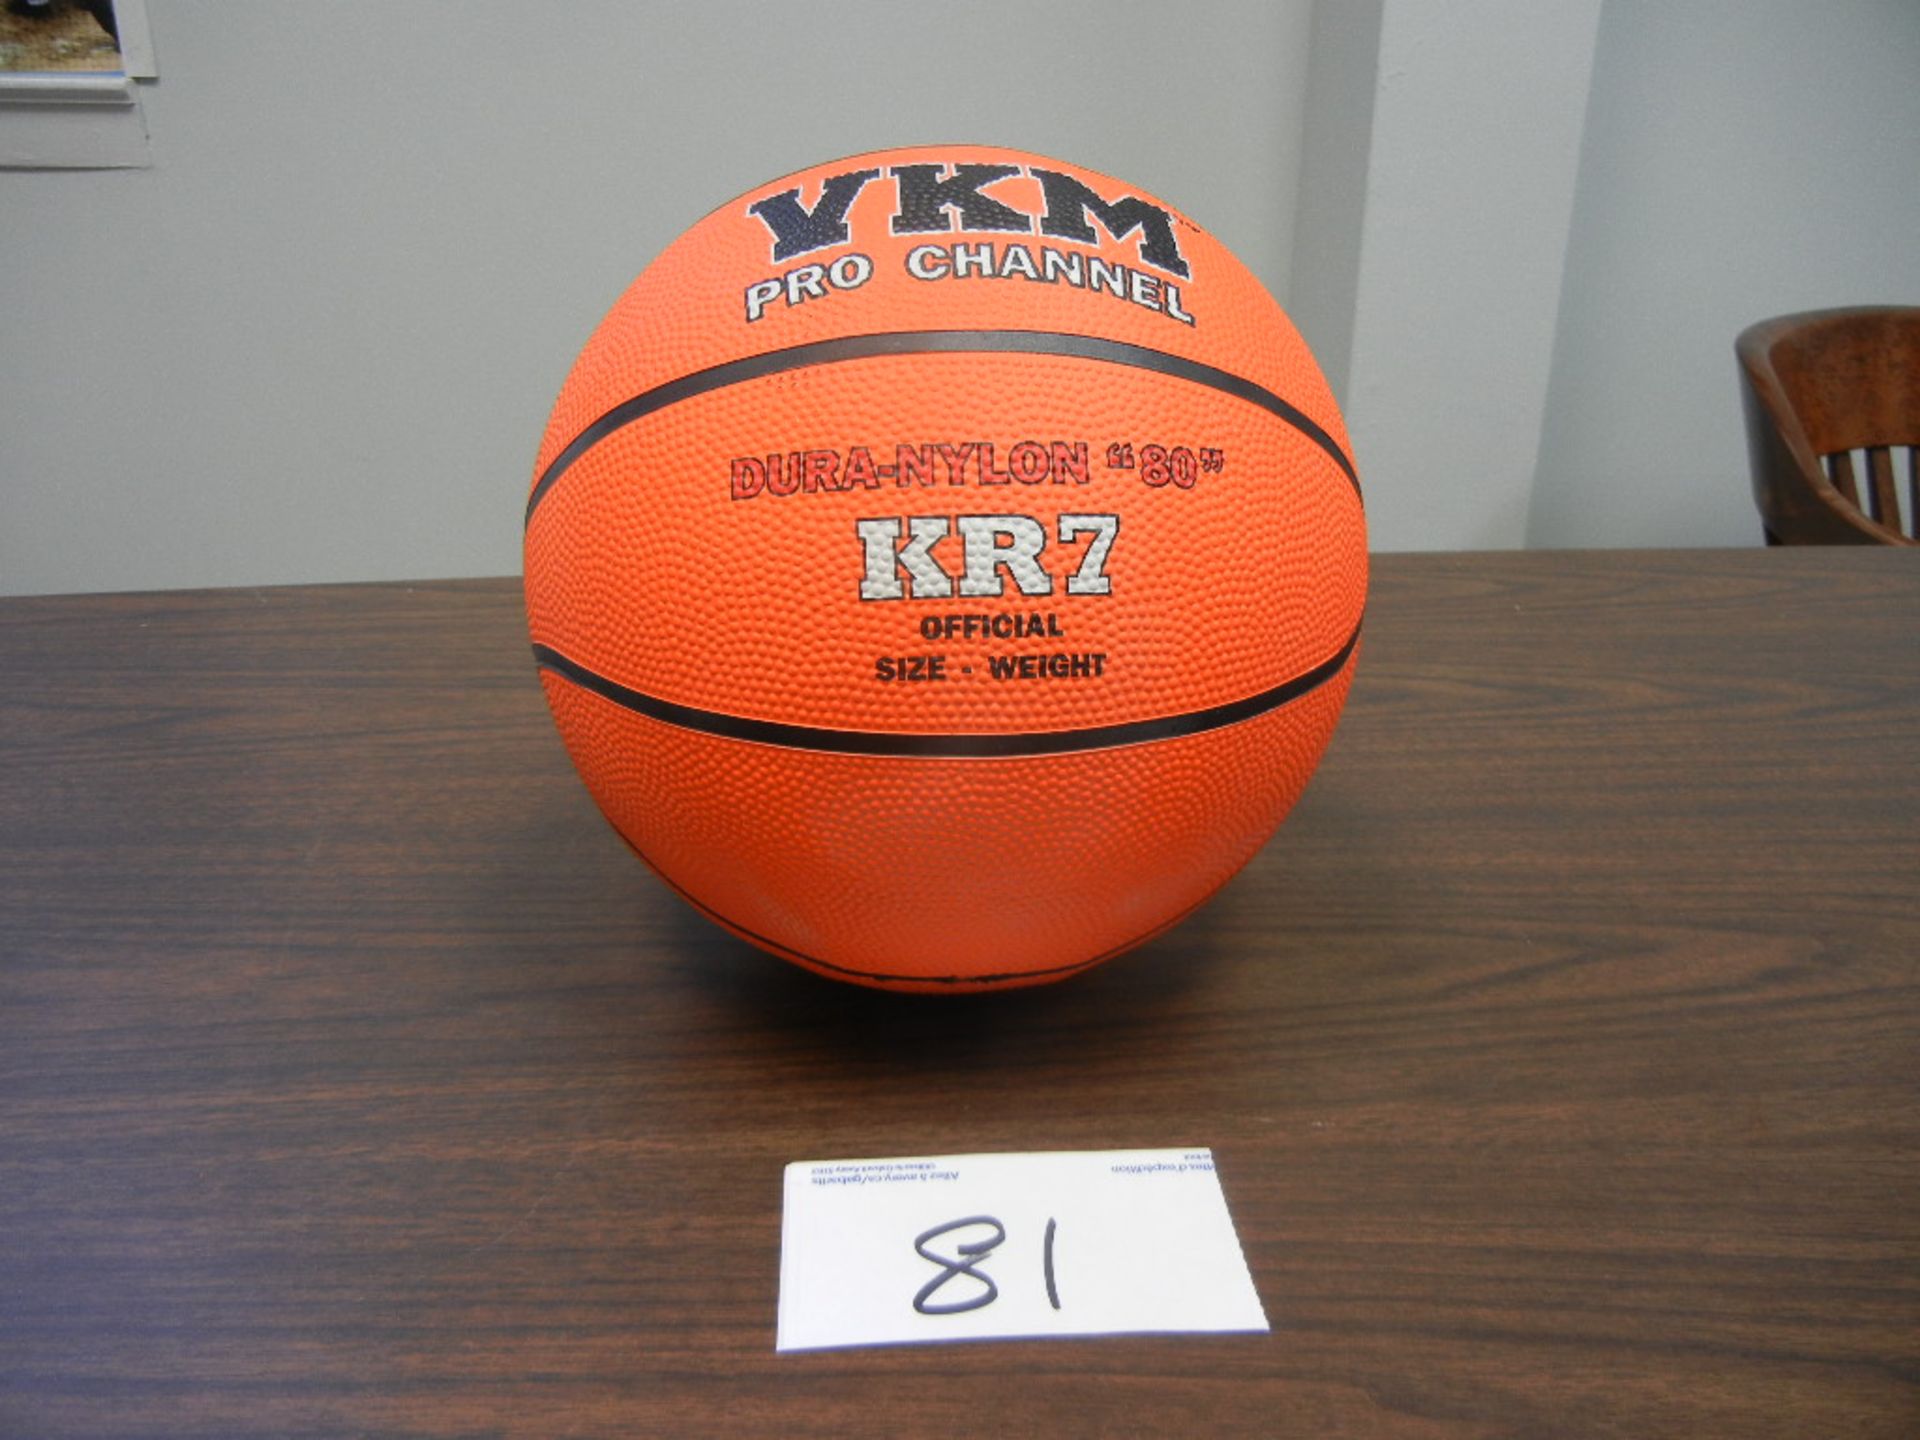 High Quality,Rubber Cover, Official International Size 7 Basketball